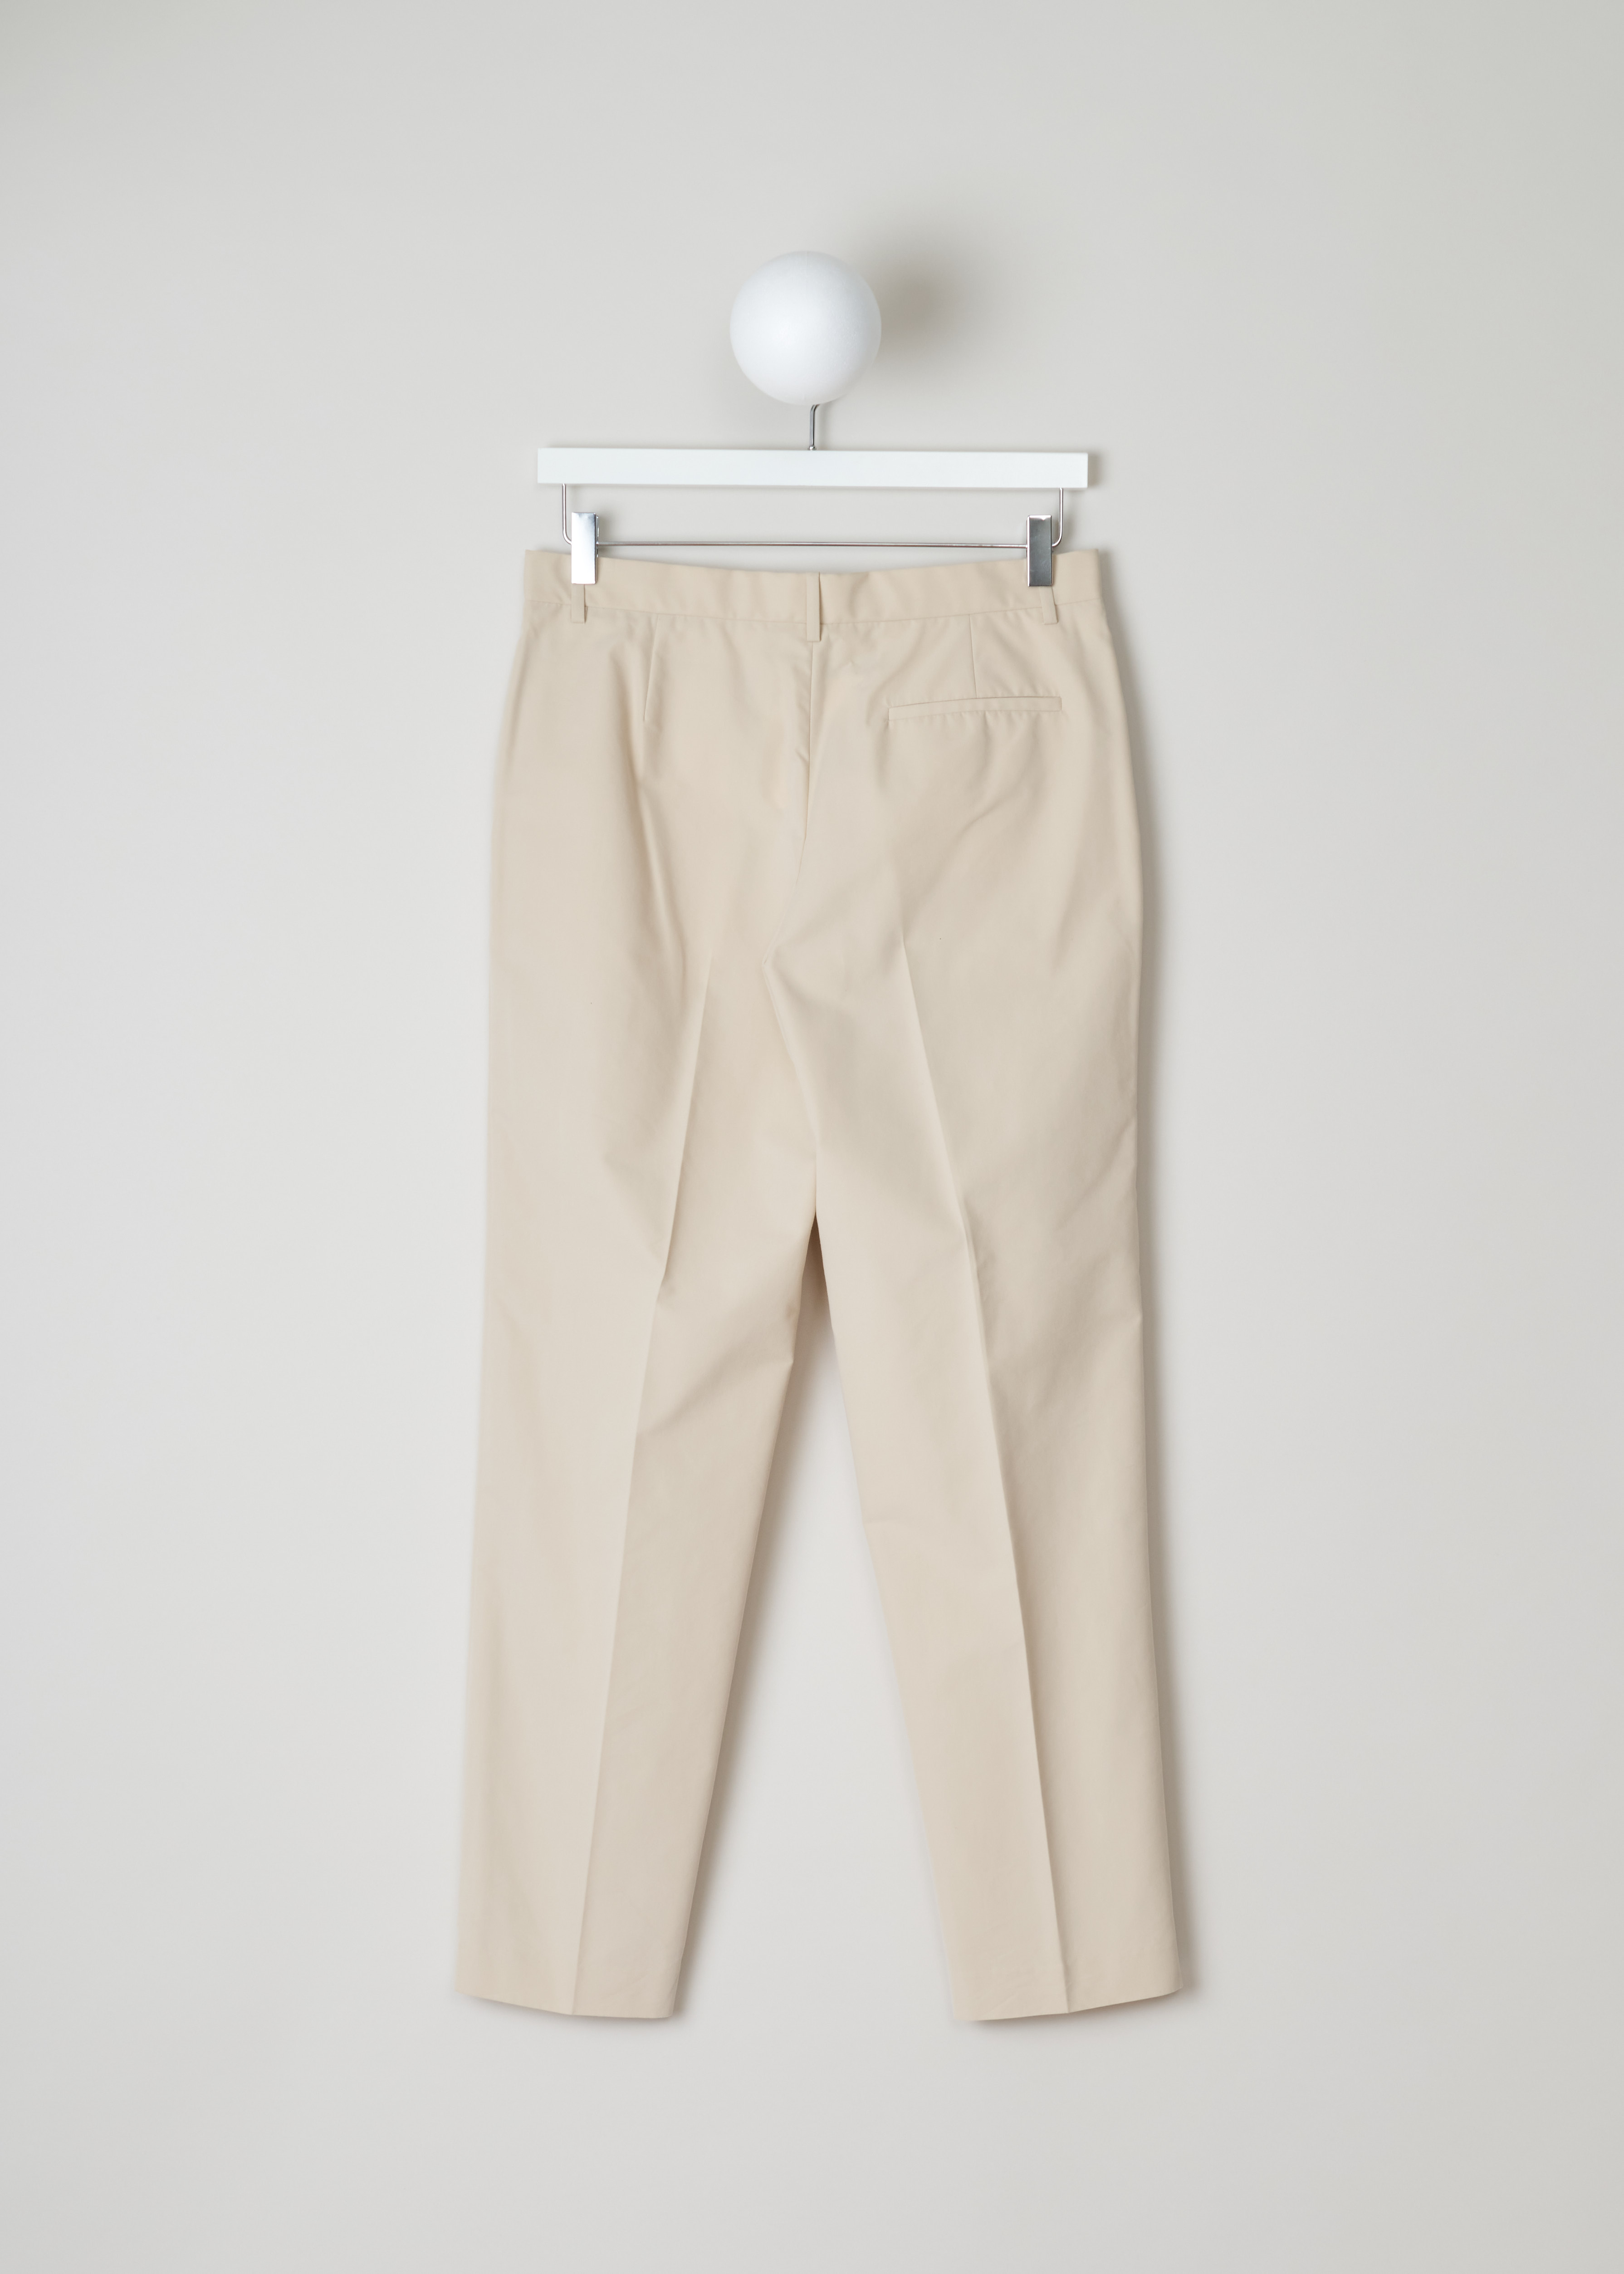 The Row mapion pant MAPION_PANT_1_595W534 pearl back. Pearl coloured Mapion pant with side pockets, welt pocket at the back with button closure, natural waist rise, straight legs and centre creases.â€ƒ